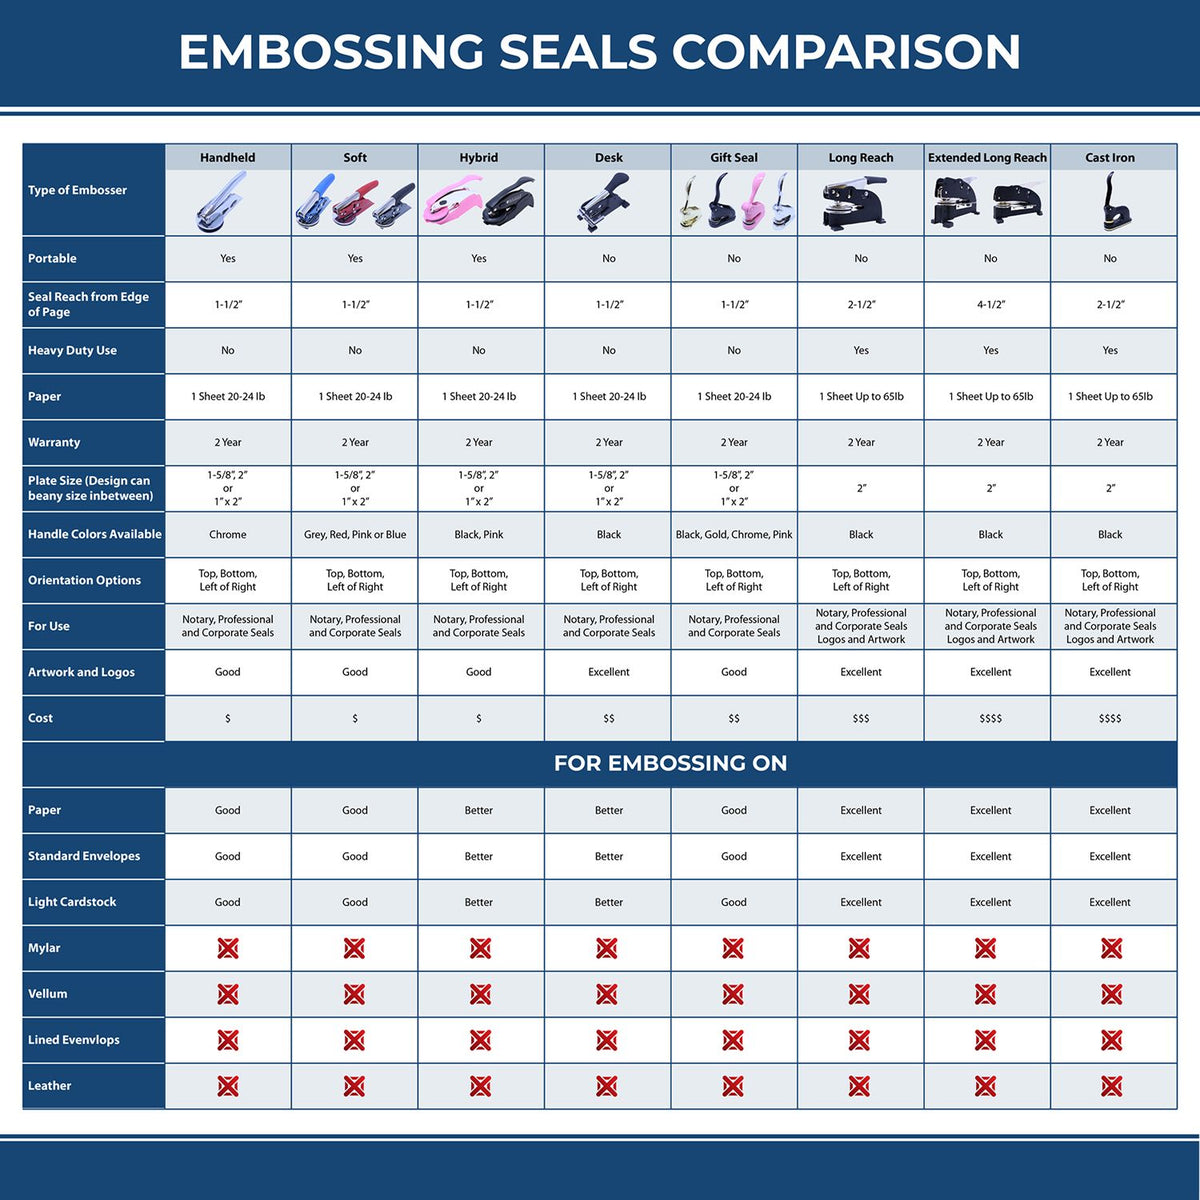 A comparison chart for the different types of mount models available for the Soft Florida Professional Engineer Seal.